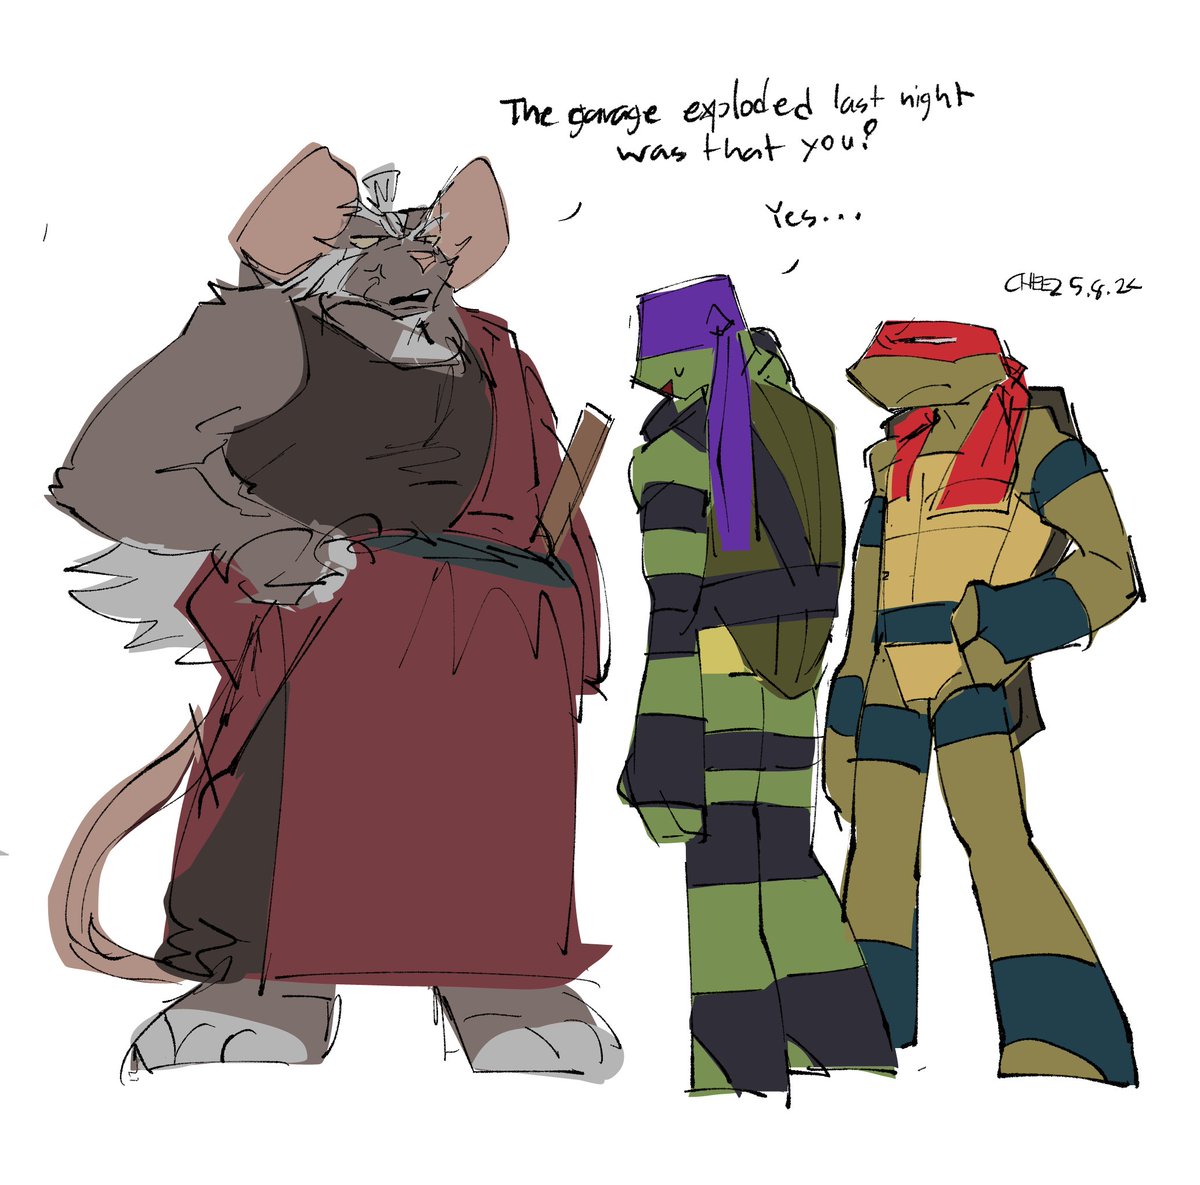 TMNTOG SPLINTER?? #TMNT #TMNTOG Im not quite satisfied with his color palette yet but mostly this is hit final design.. he's so big that makes ppl wonder if he's a rat or a bear